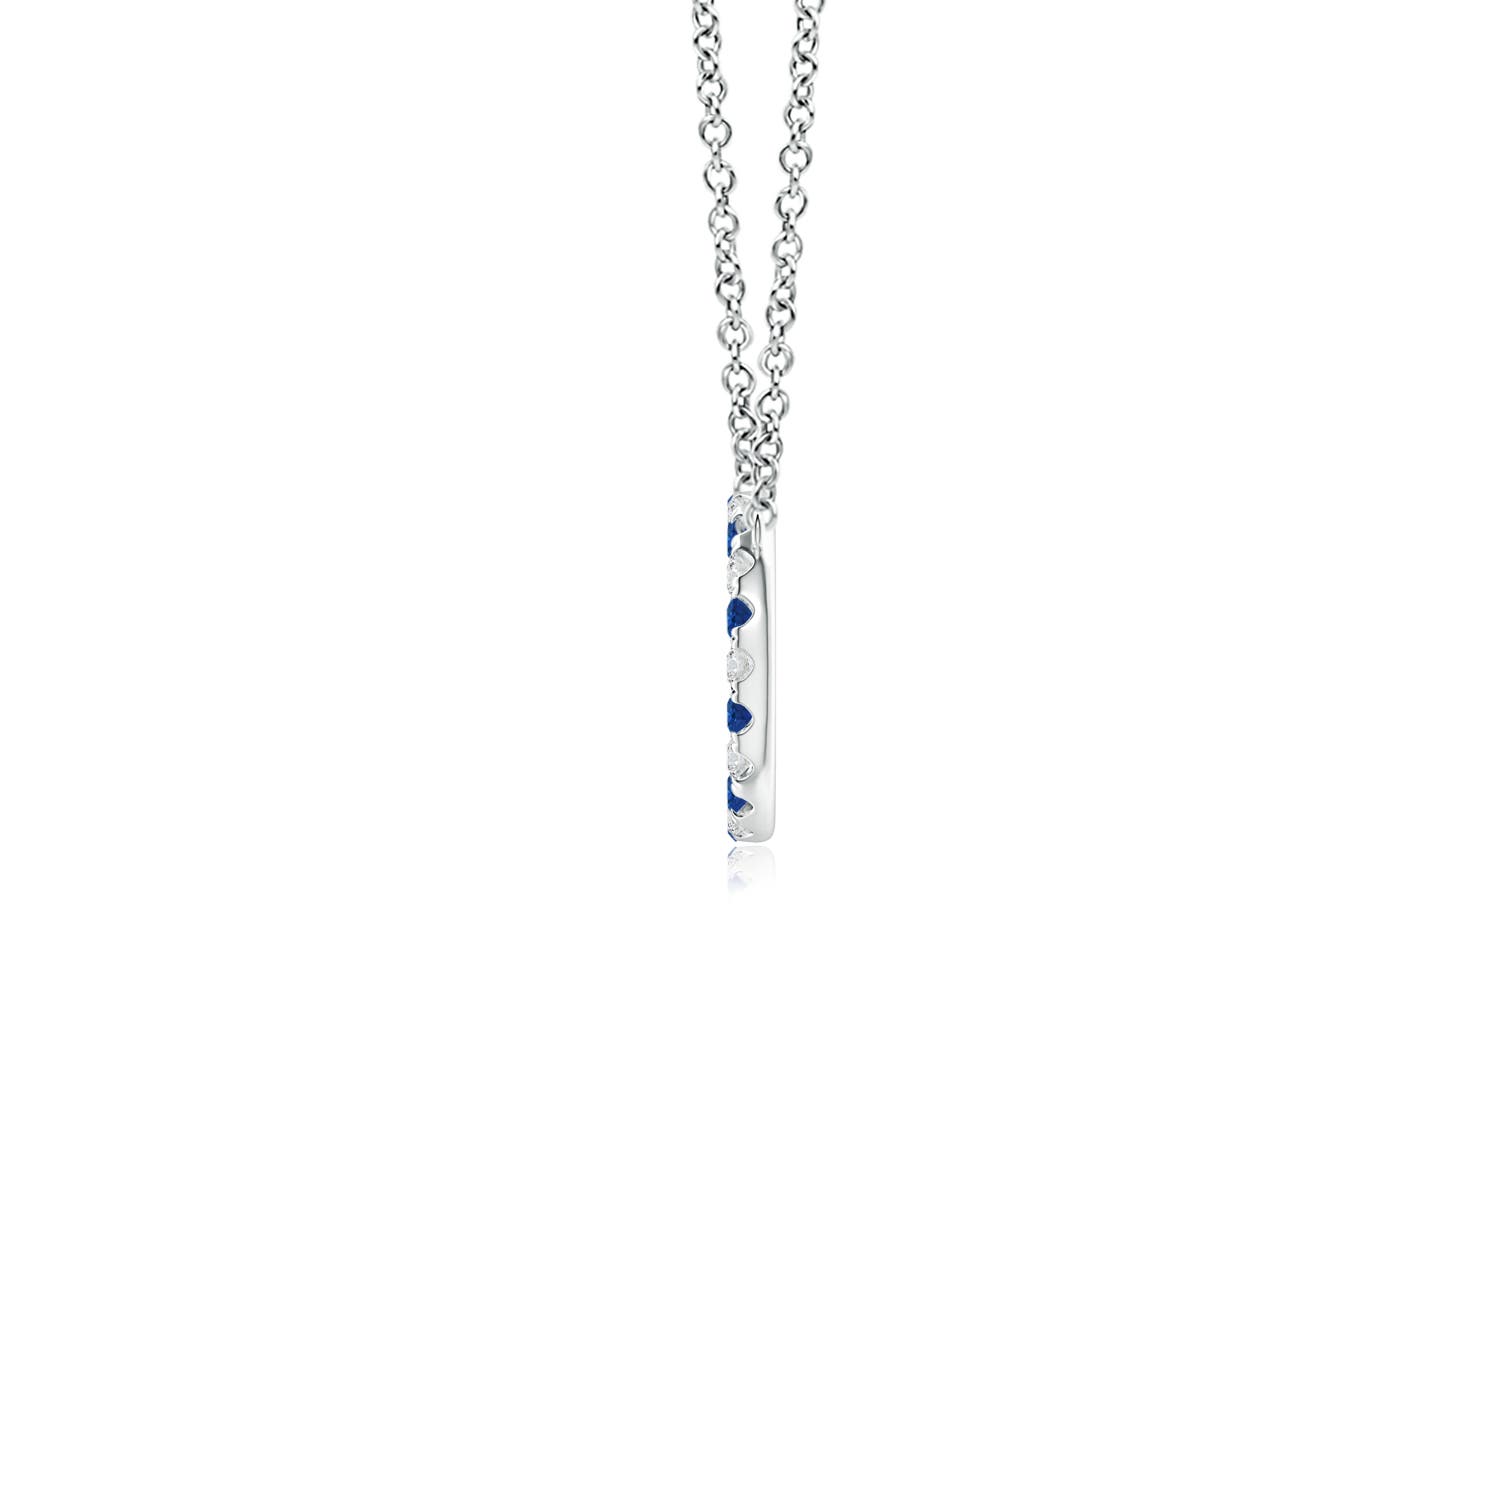 Sparkling White Diamond Eternity Necklace in 14k Solid Gold